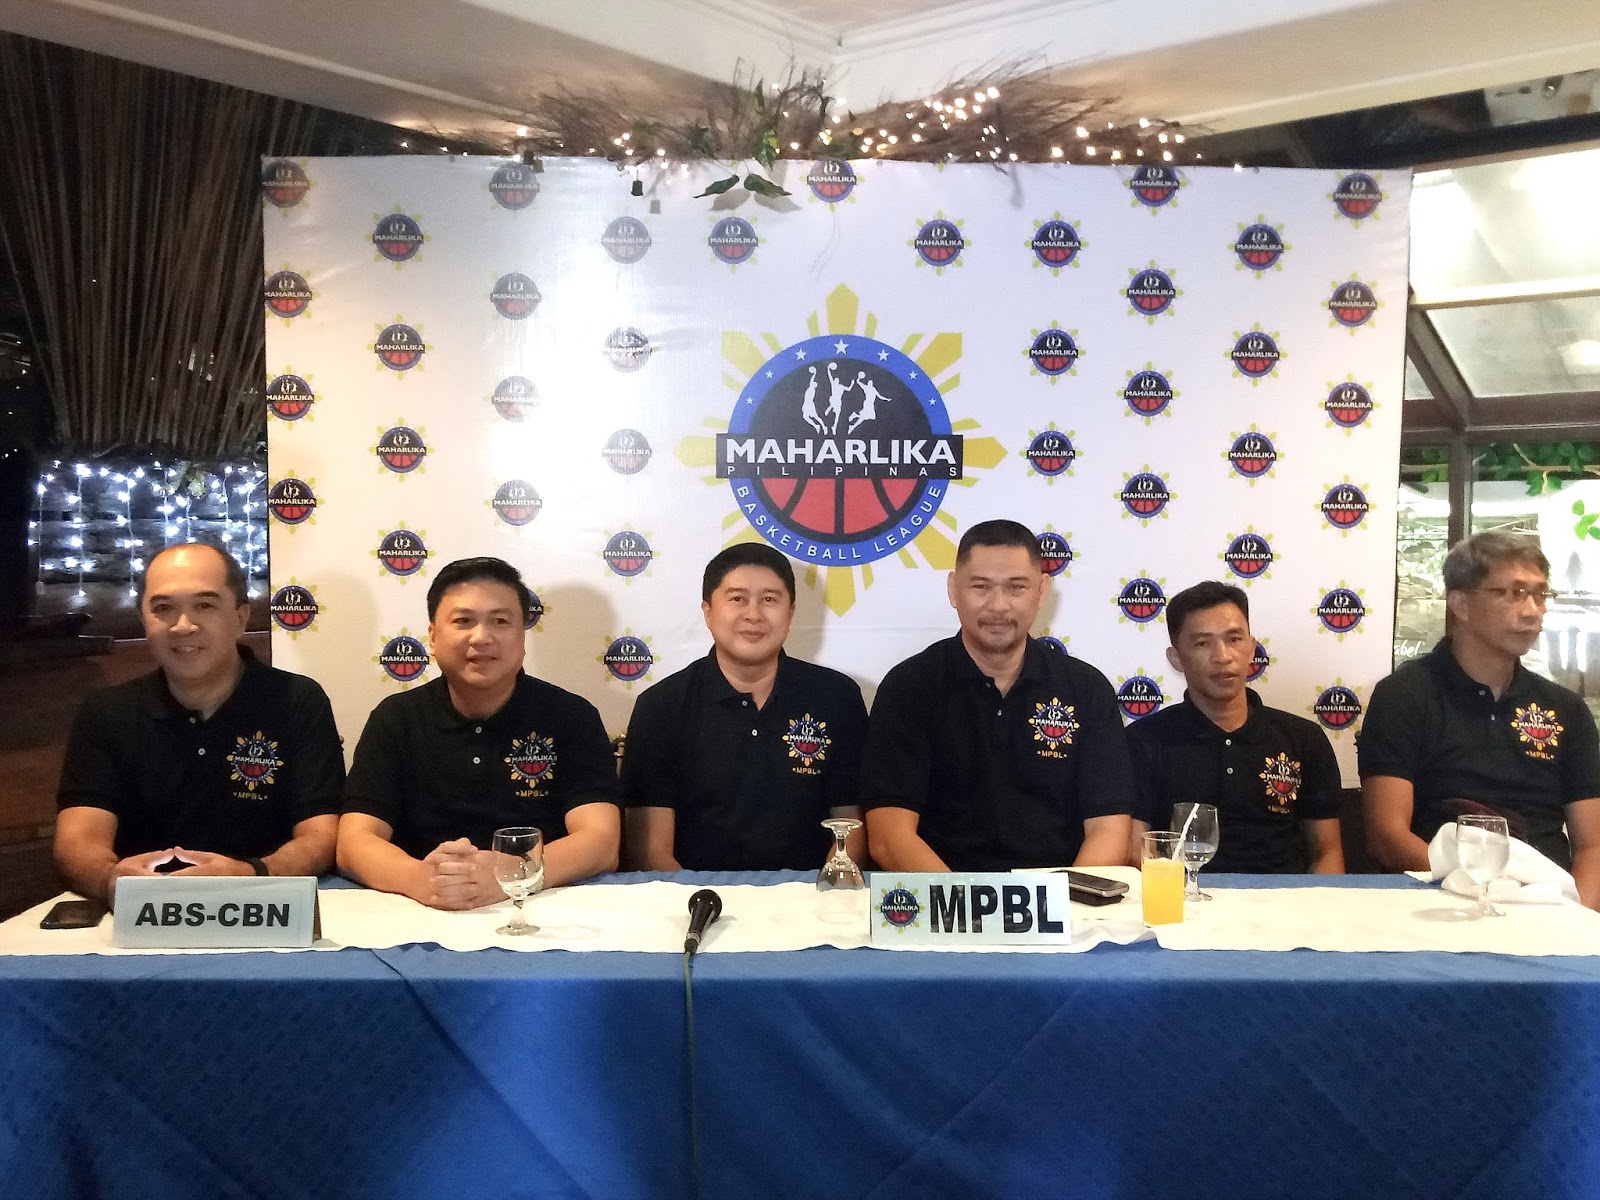 Enjoying Wonderful World All is set for the Maharlika Pilipinas Basketball League (MPBL) on ABS-CBN Sports +Action premiere on January 25